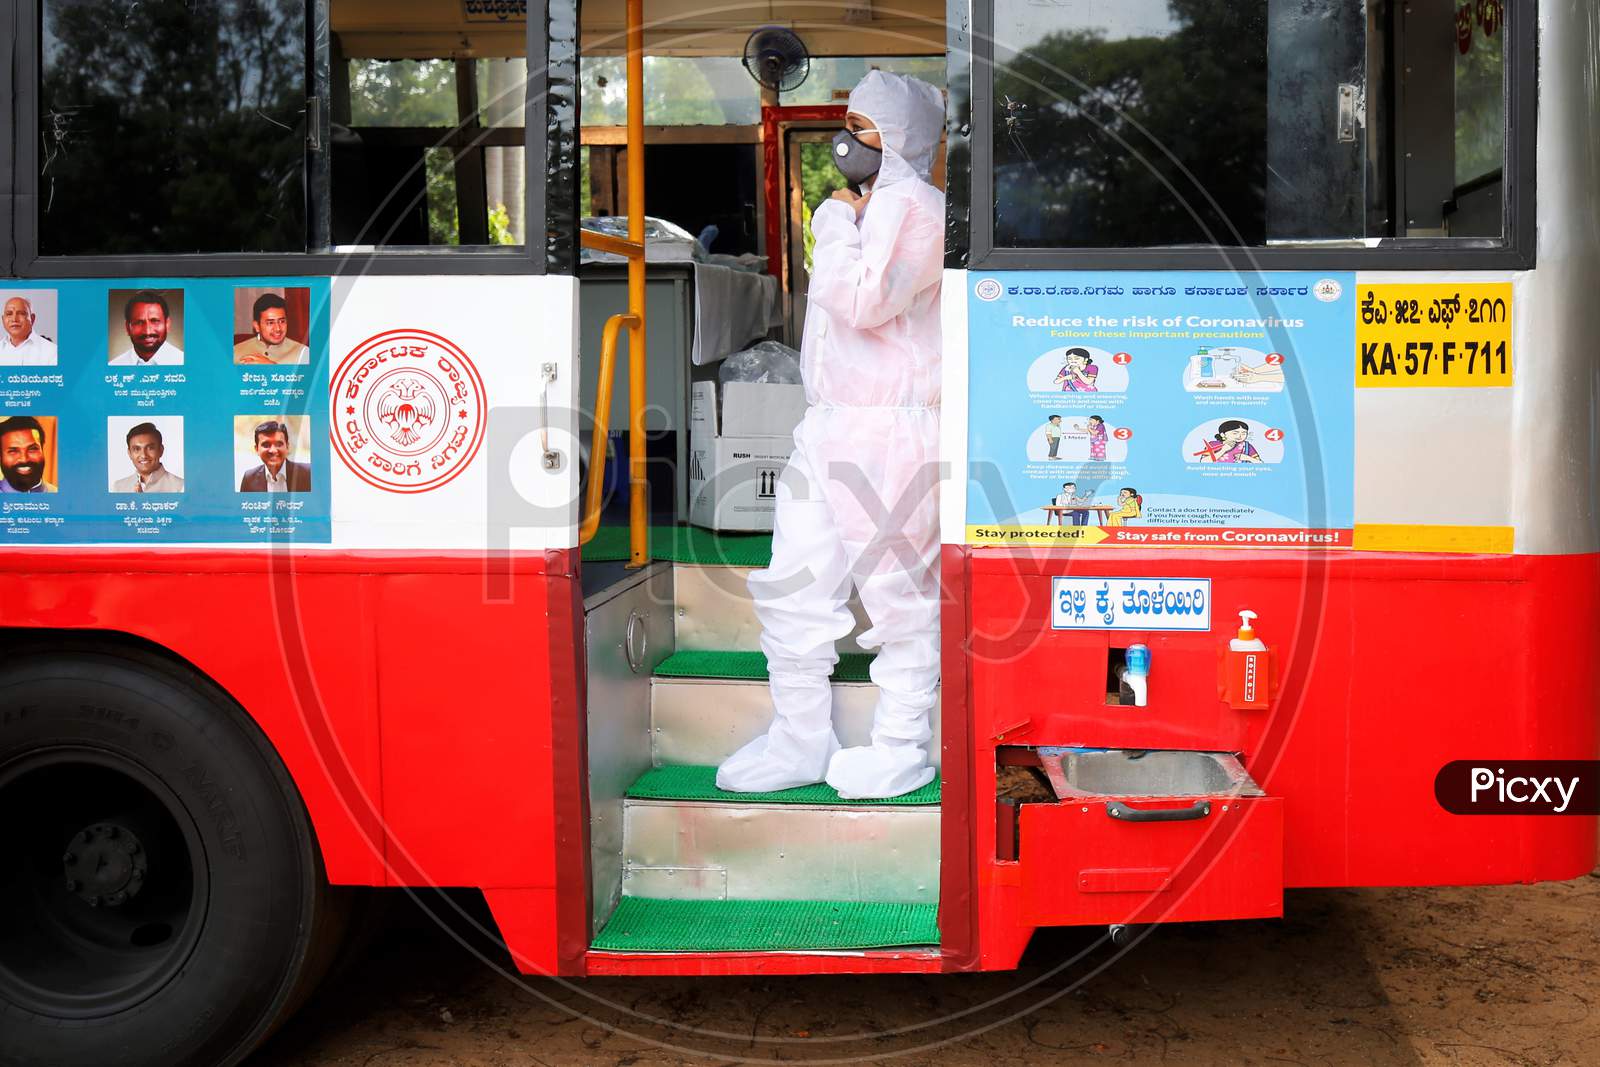 A doctor waits for personnel to test for covid-19 in a repurposed bus during a health screening camp for the police forces in Bangalore, India.